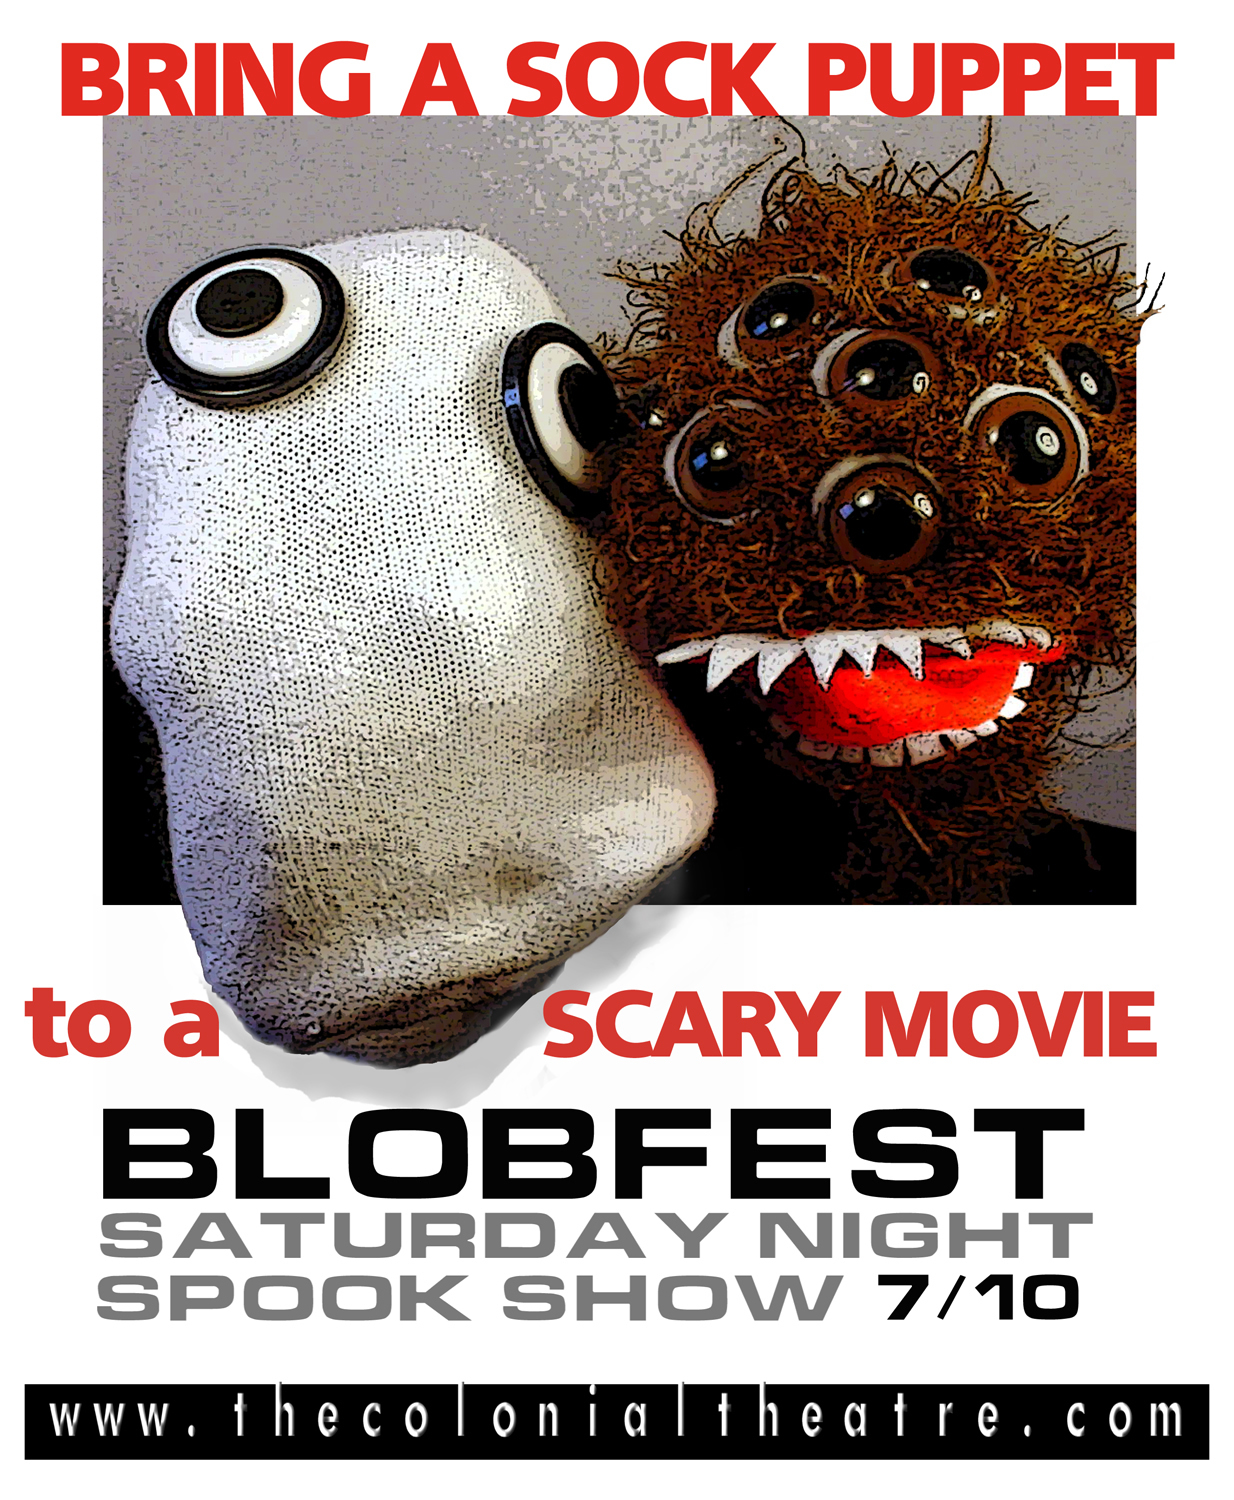 Prospective attendees of Blobfest are encouraged to bring sock puppets